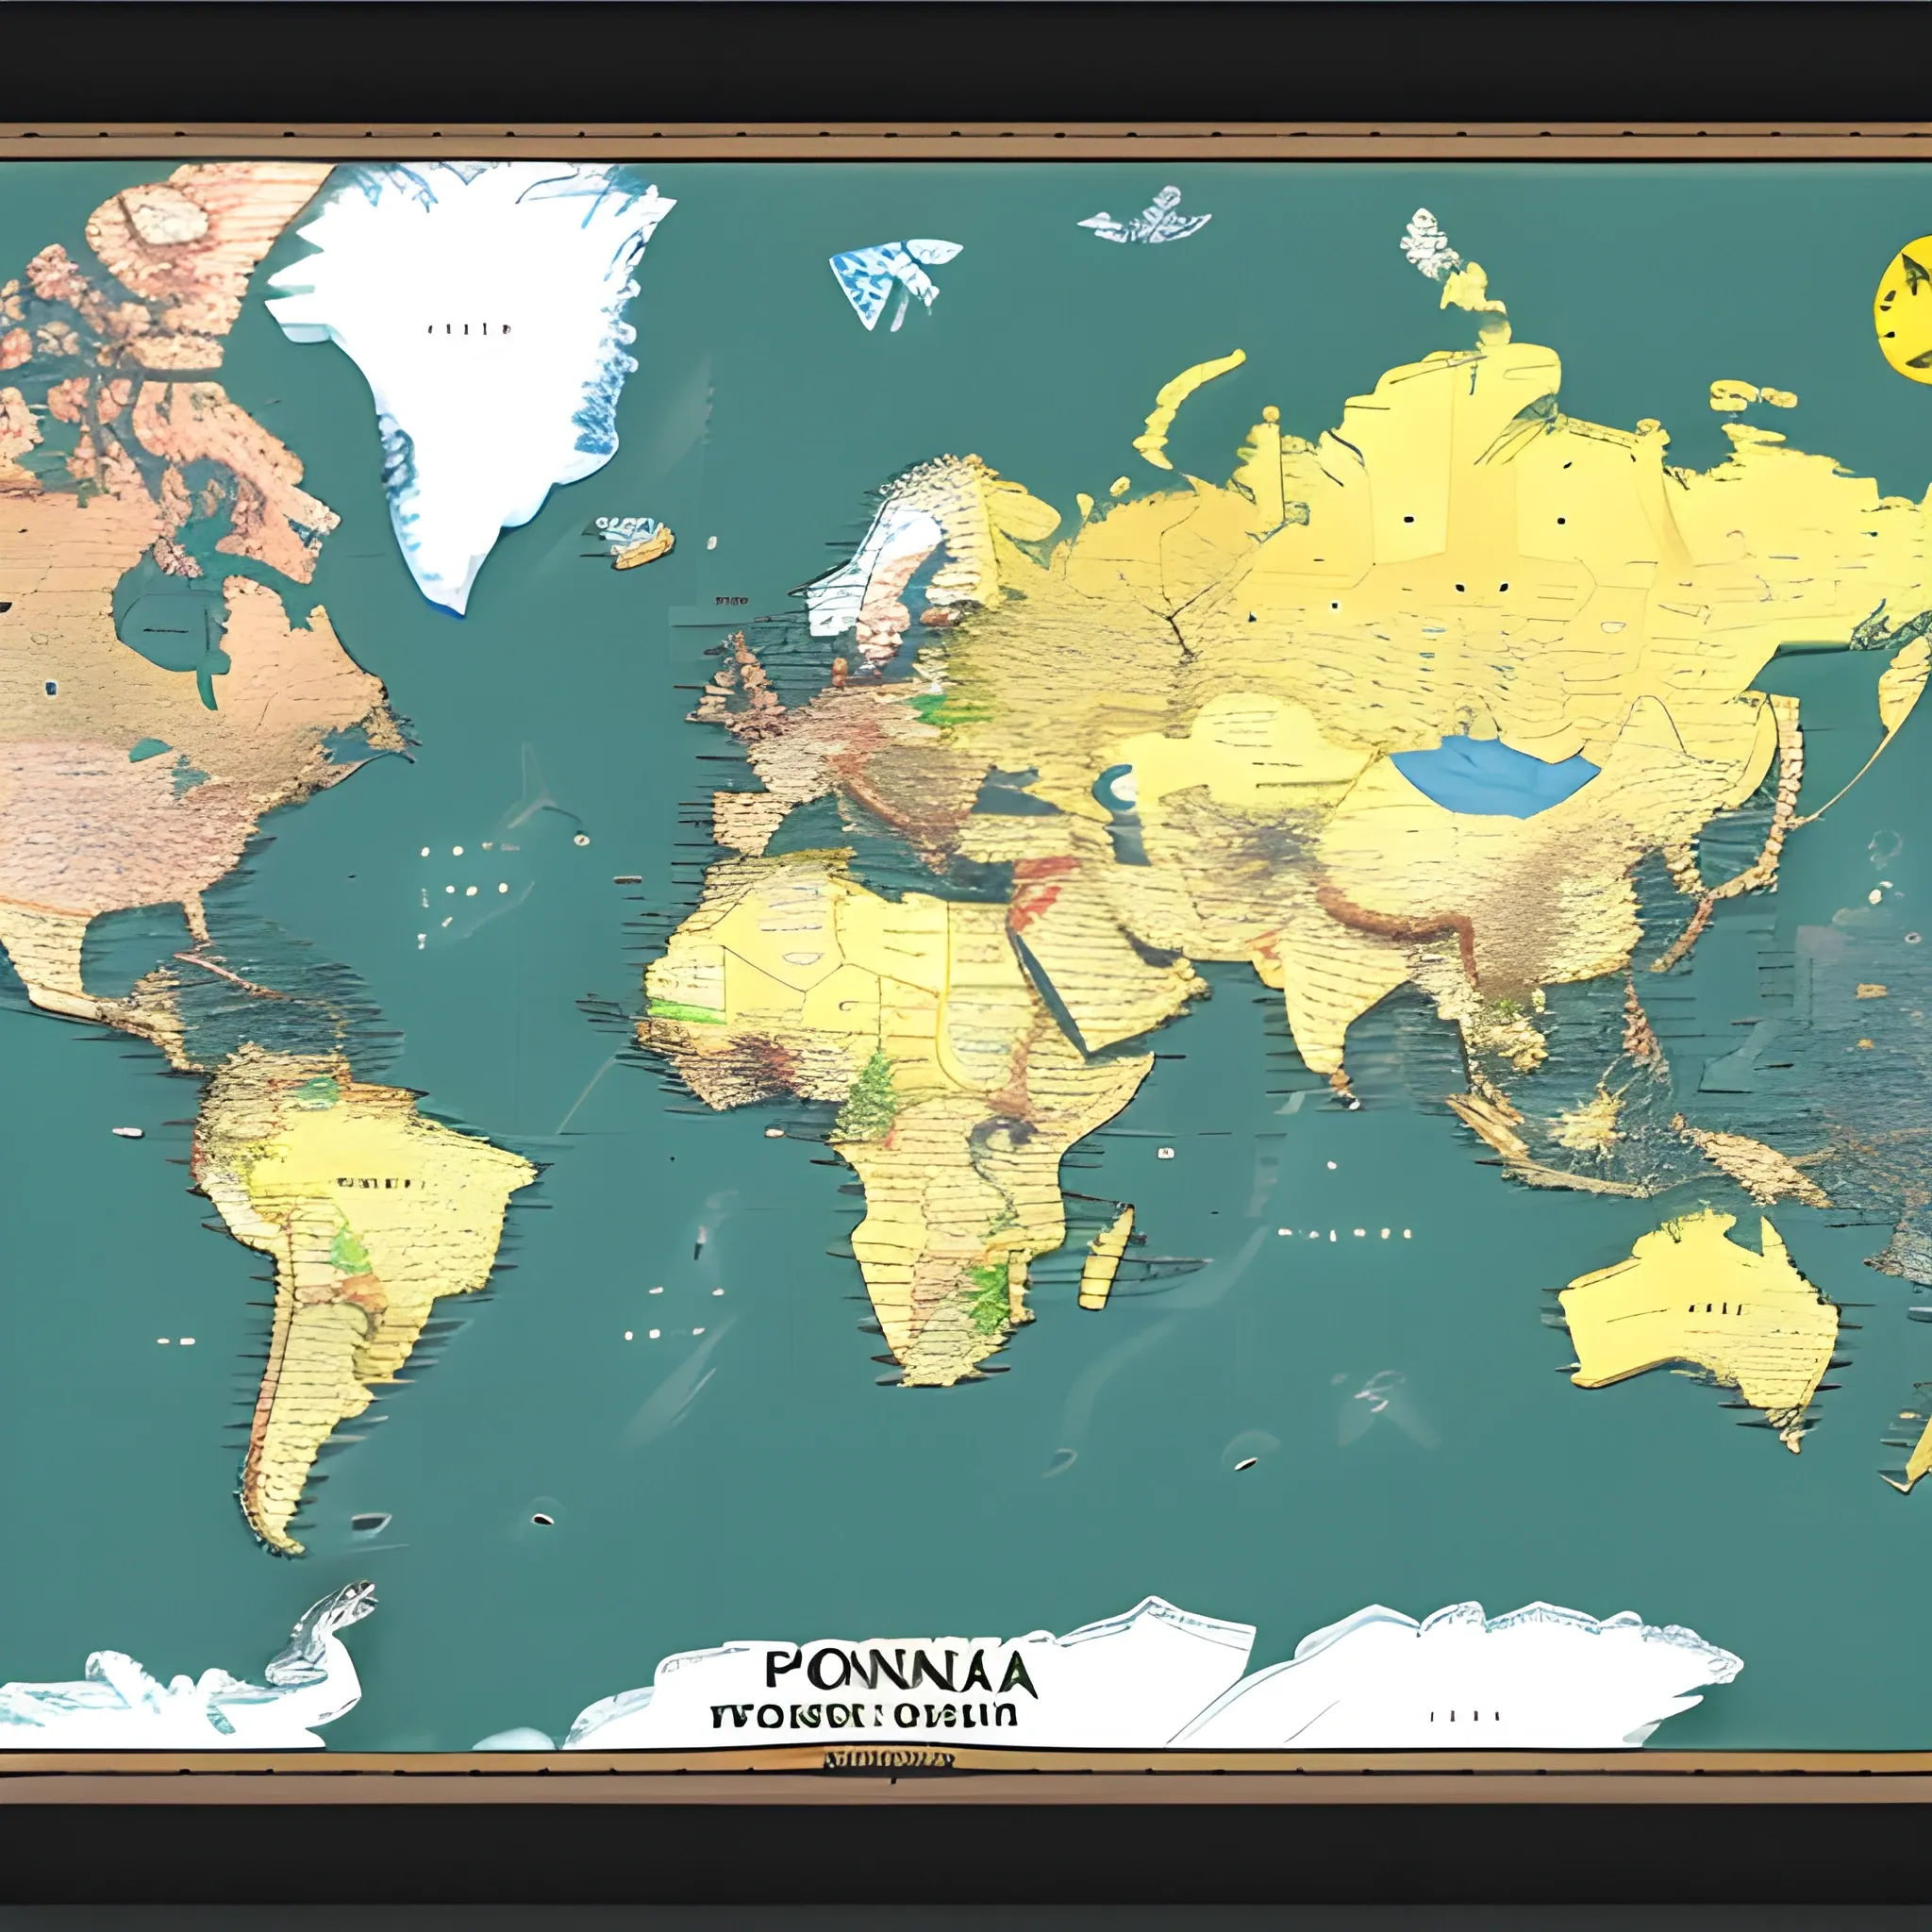 panoramic world map show country borders
